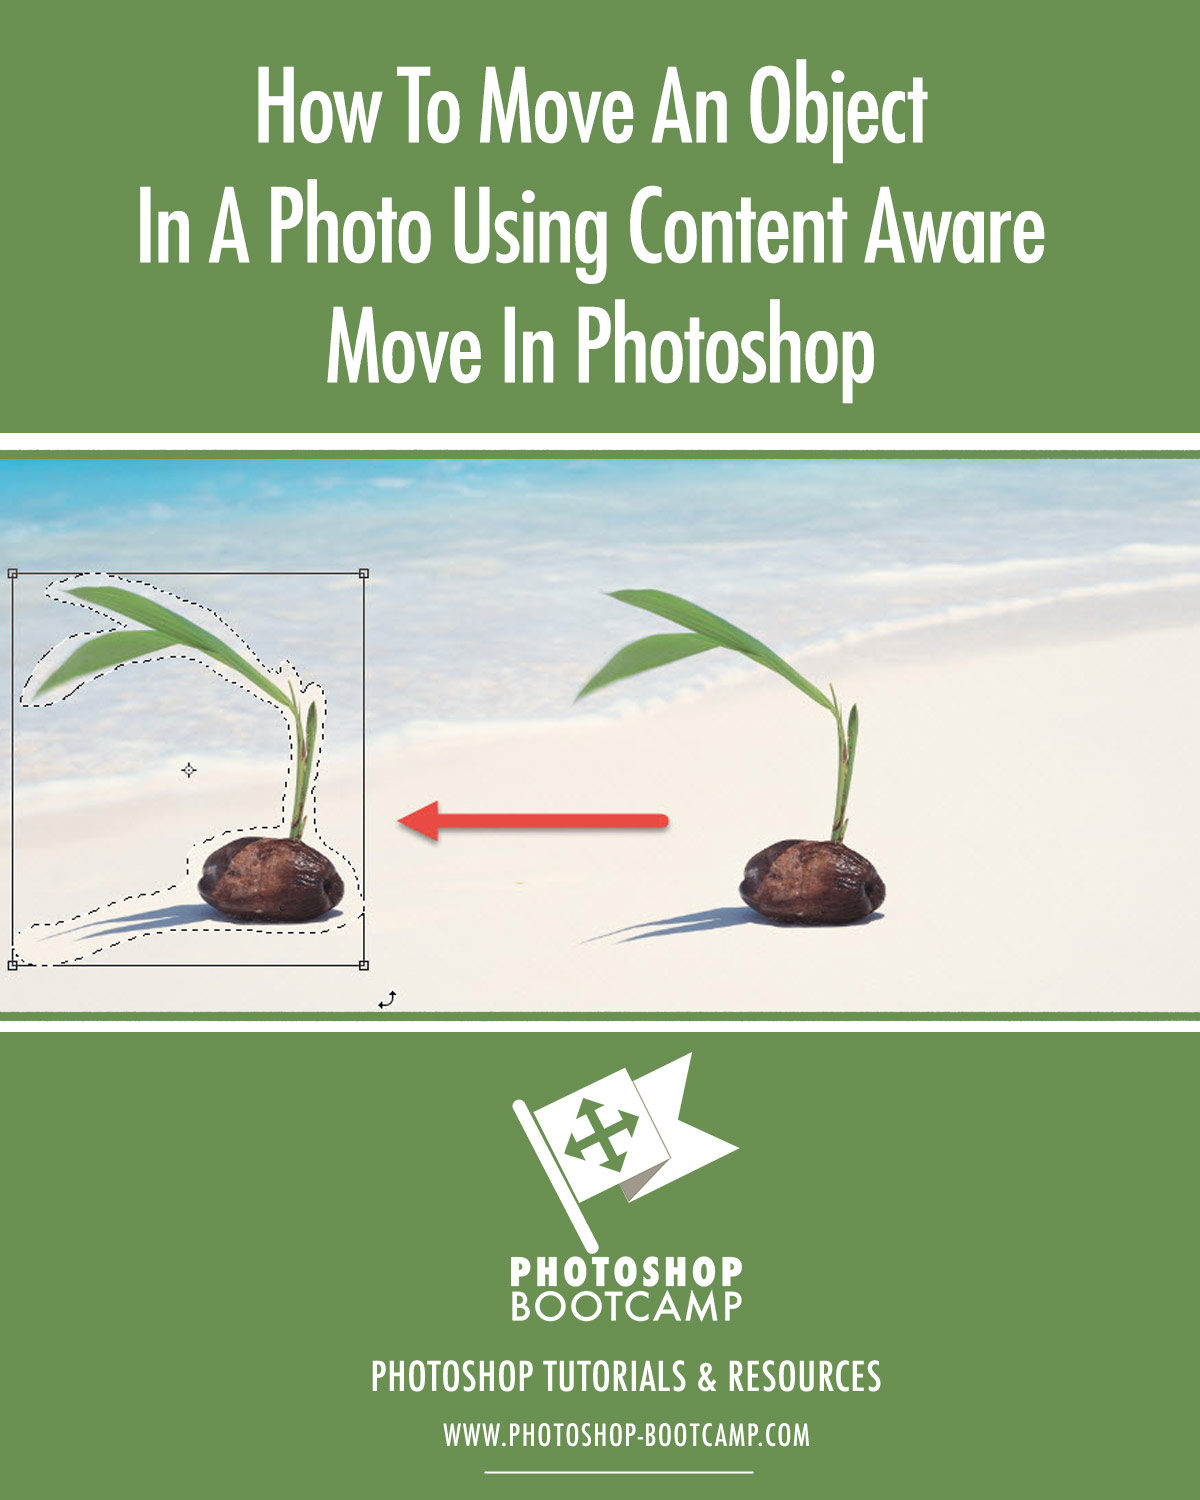 How To Move An Object In A Photo Using Content Aware Move In Photoshop